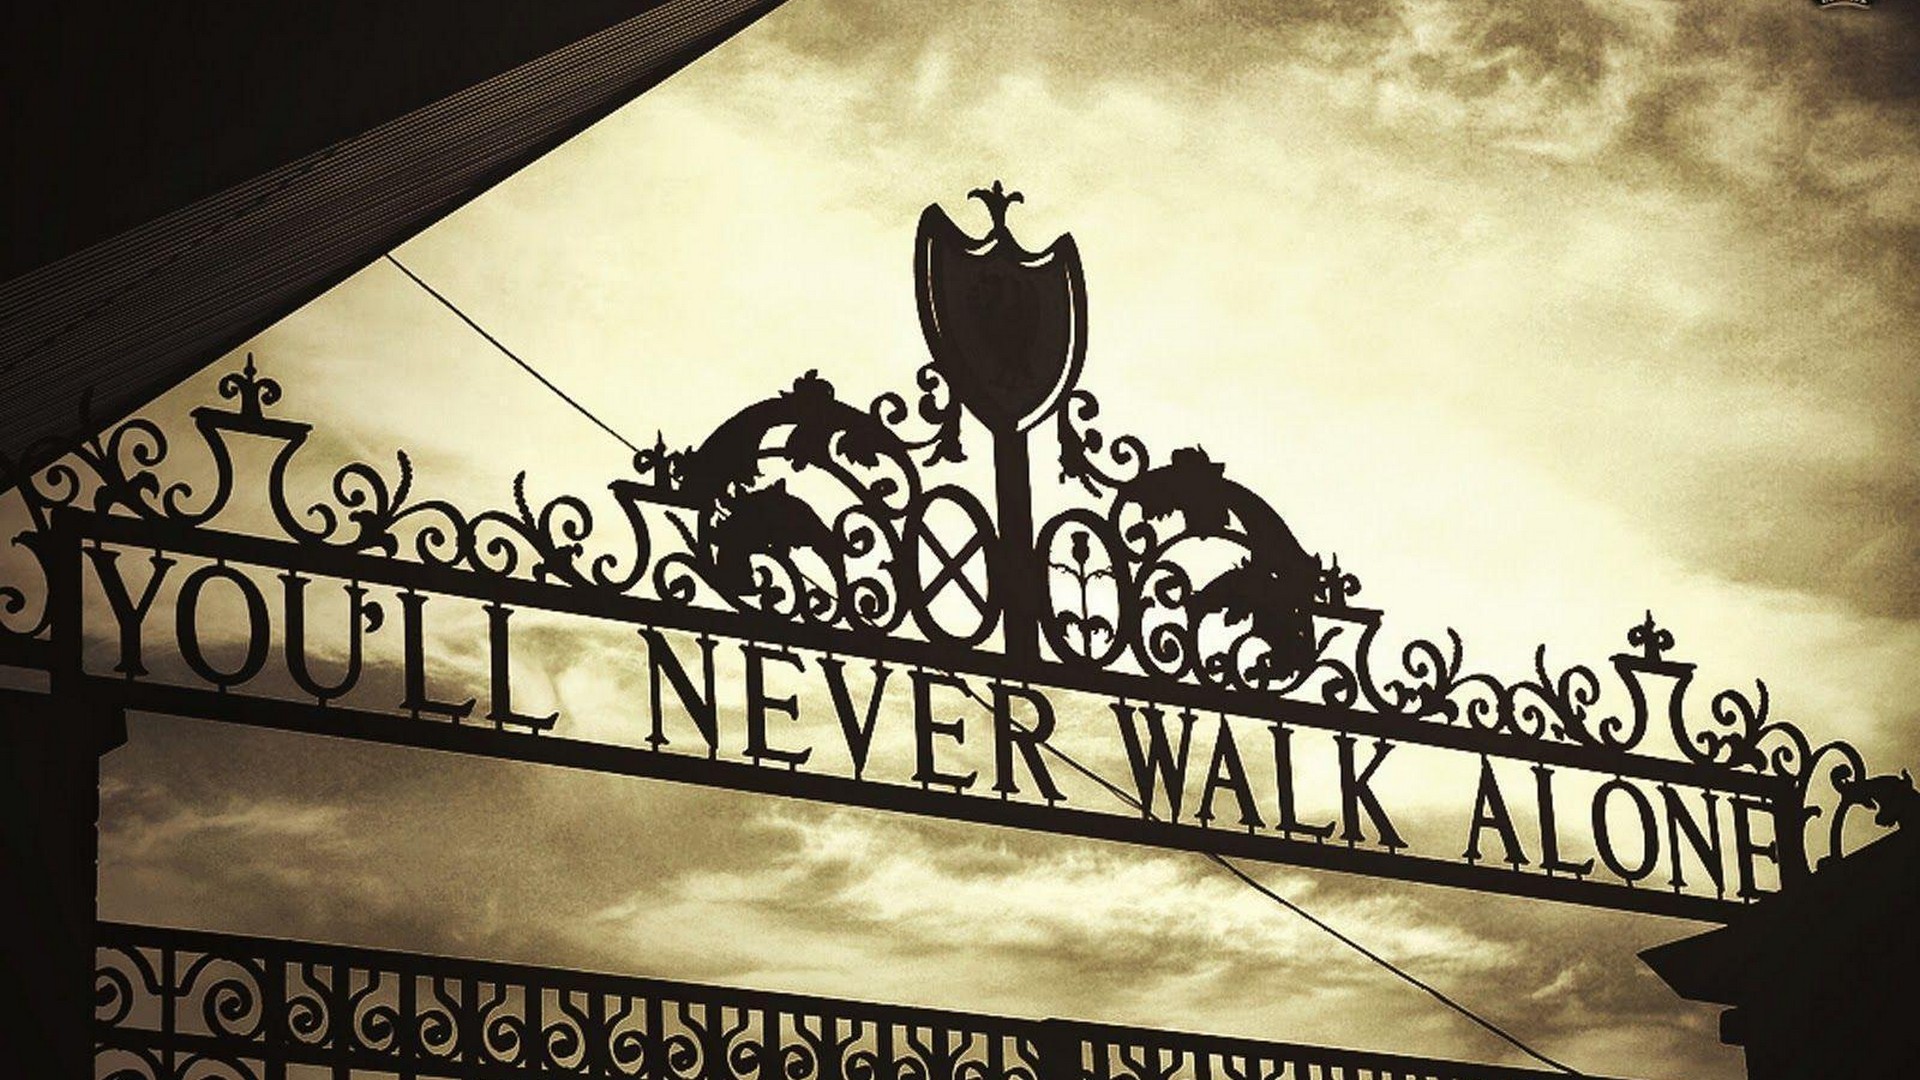 Wallpapers Computer Liverpool With High-resolution - Anfield Stadium, Shankly Gates - HD Wallpaper 